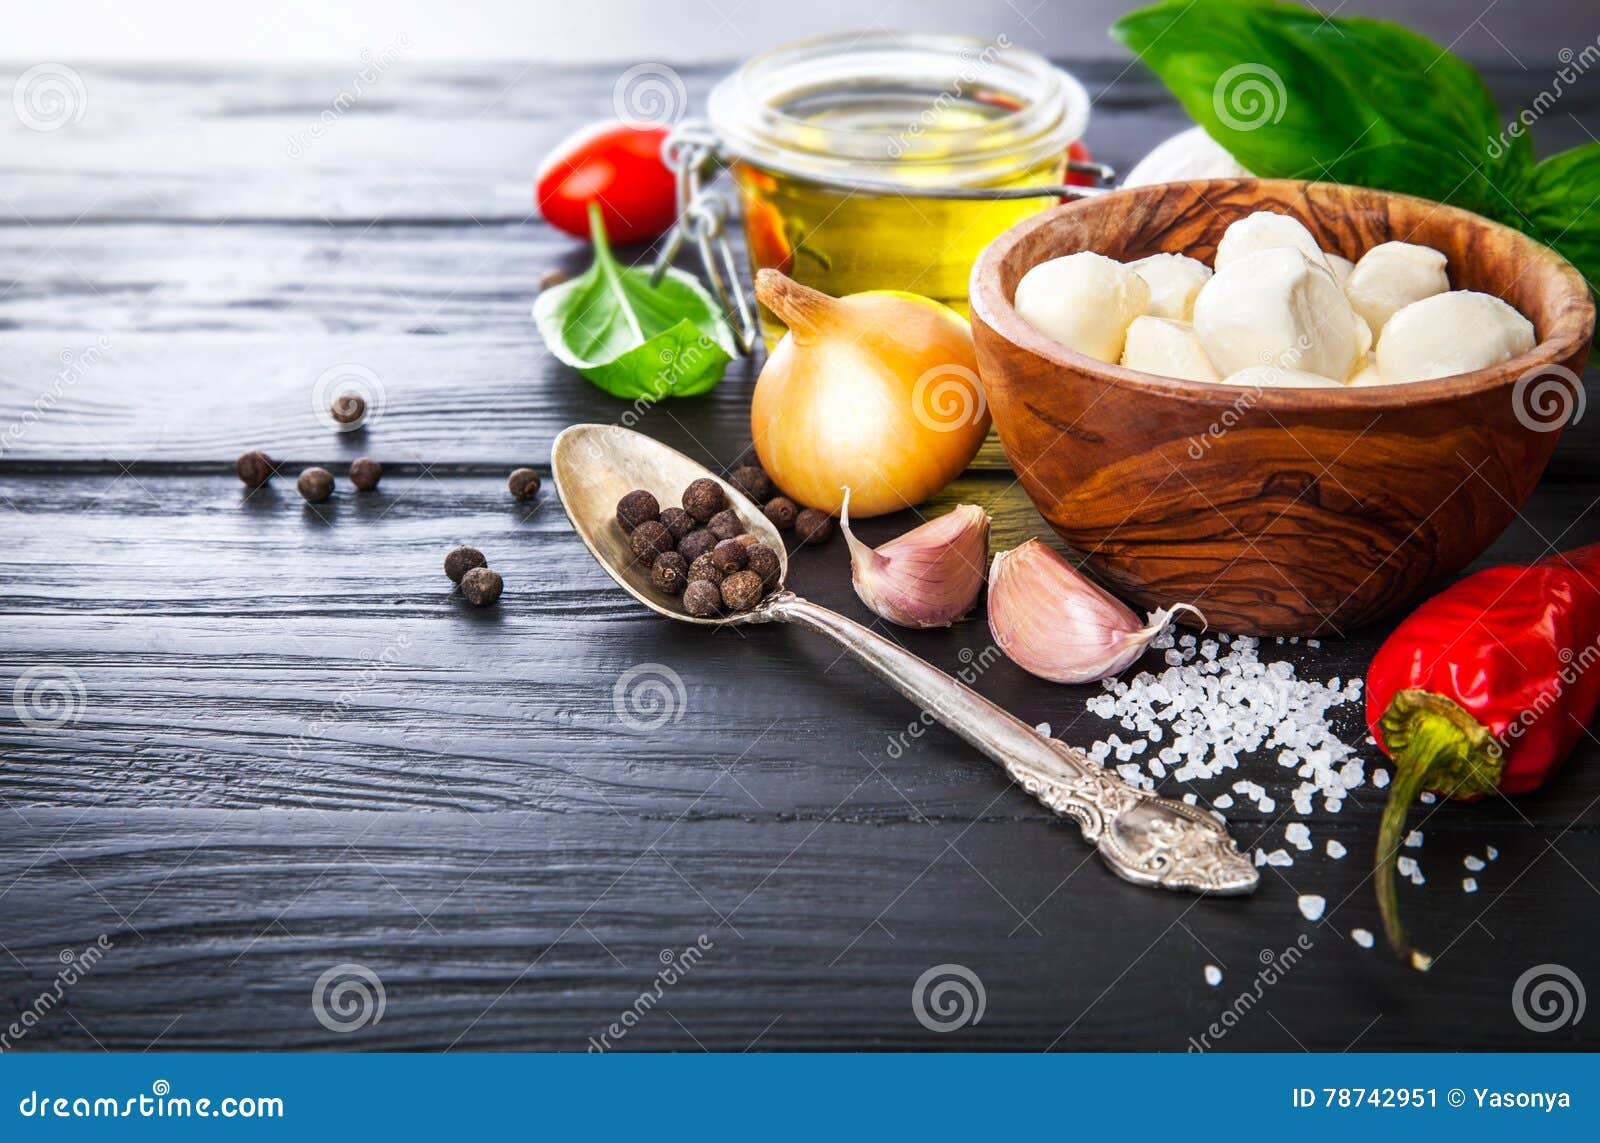 vegetables and spices ingredient for cooking italian food